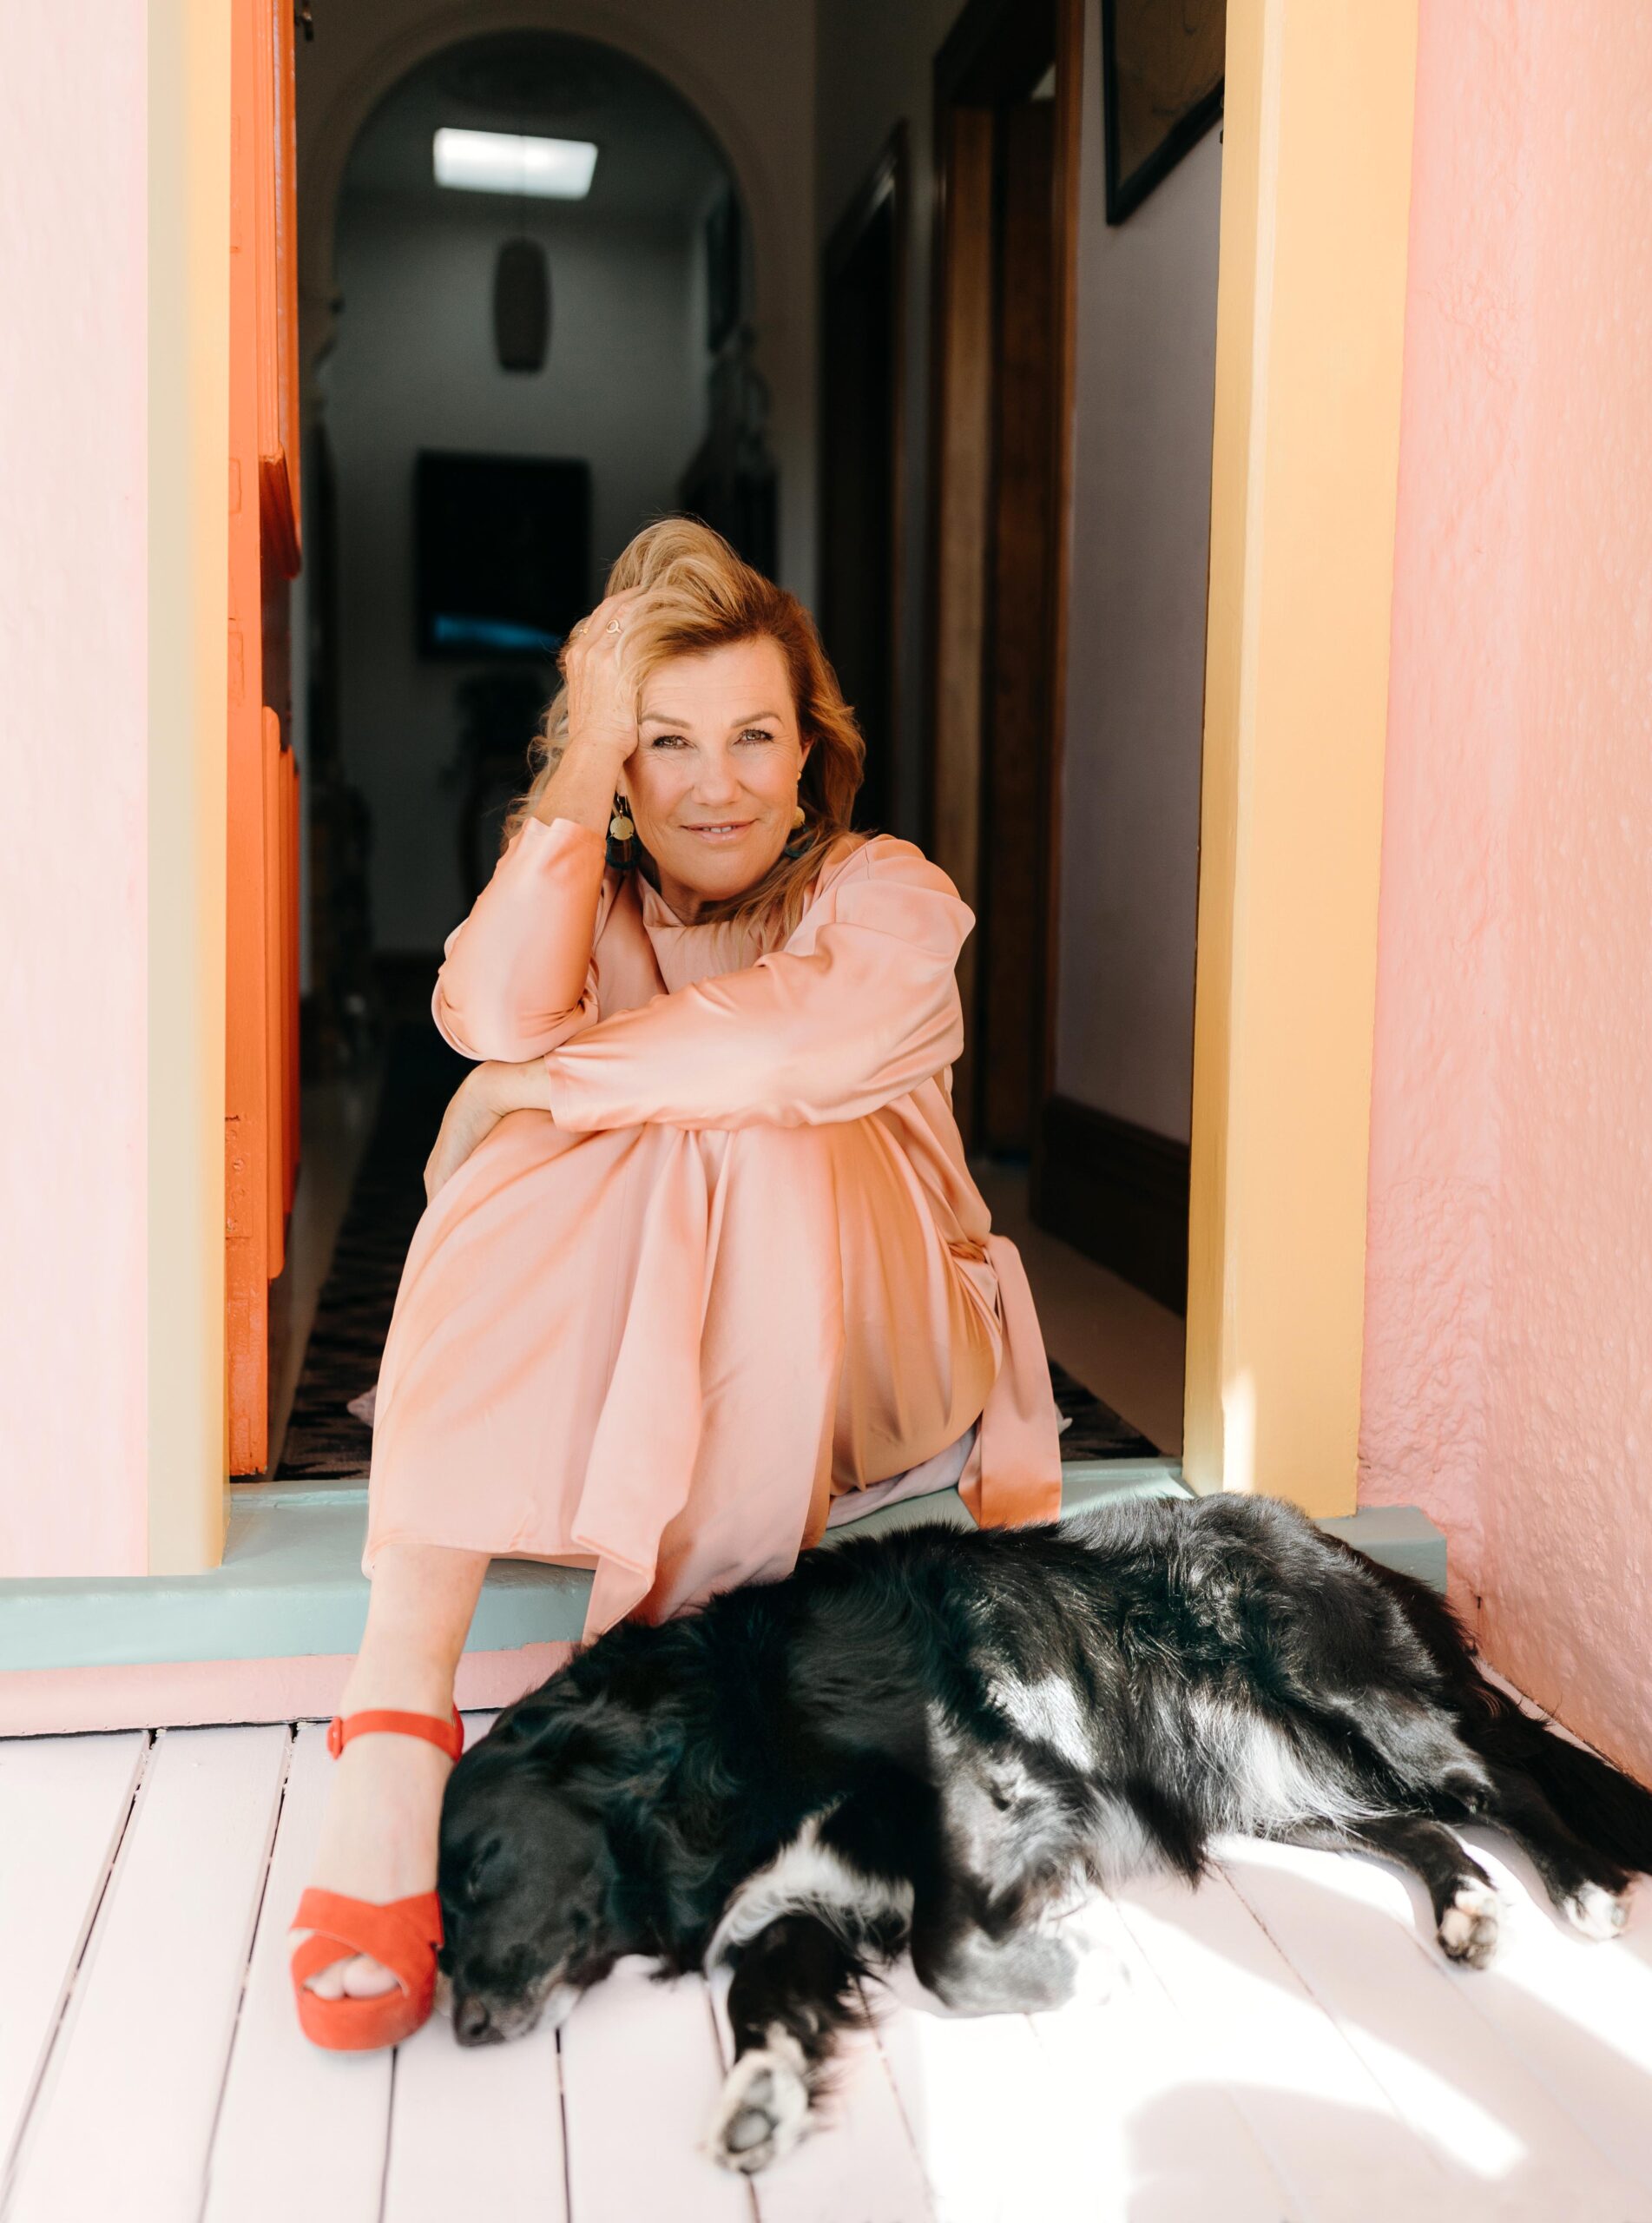 Robyn Malcolm sitting in doorway next to her pet dog. She's wearing a pink dress and red shoes.